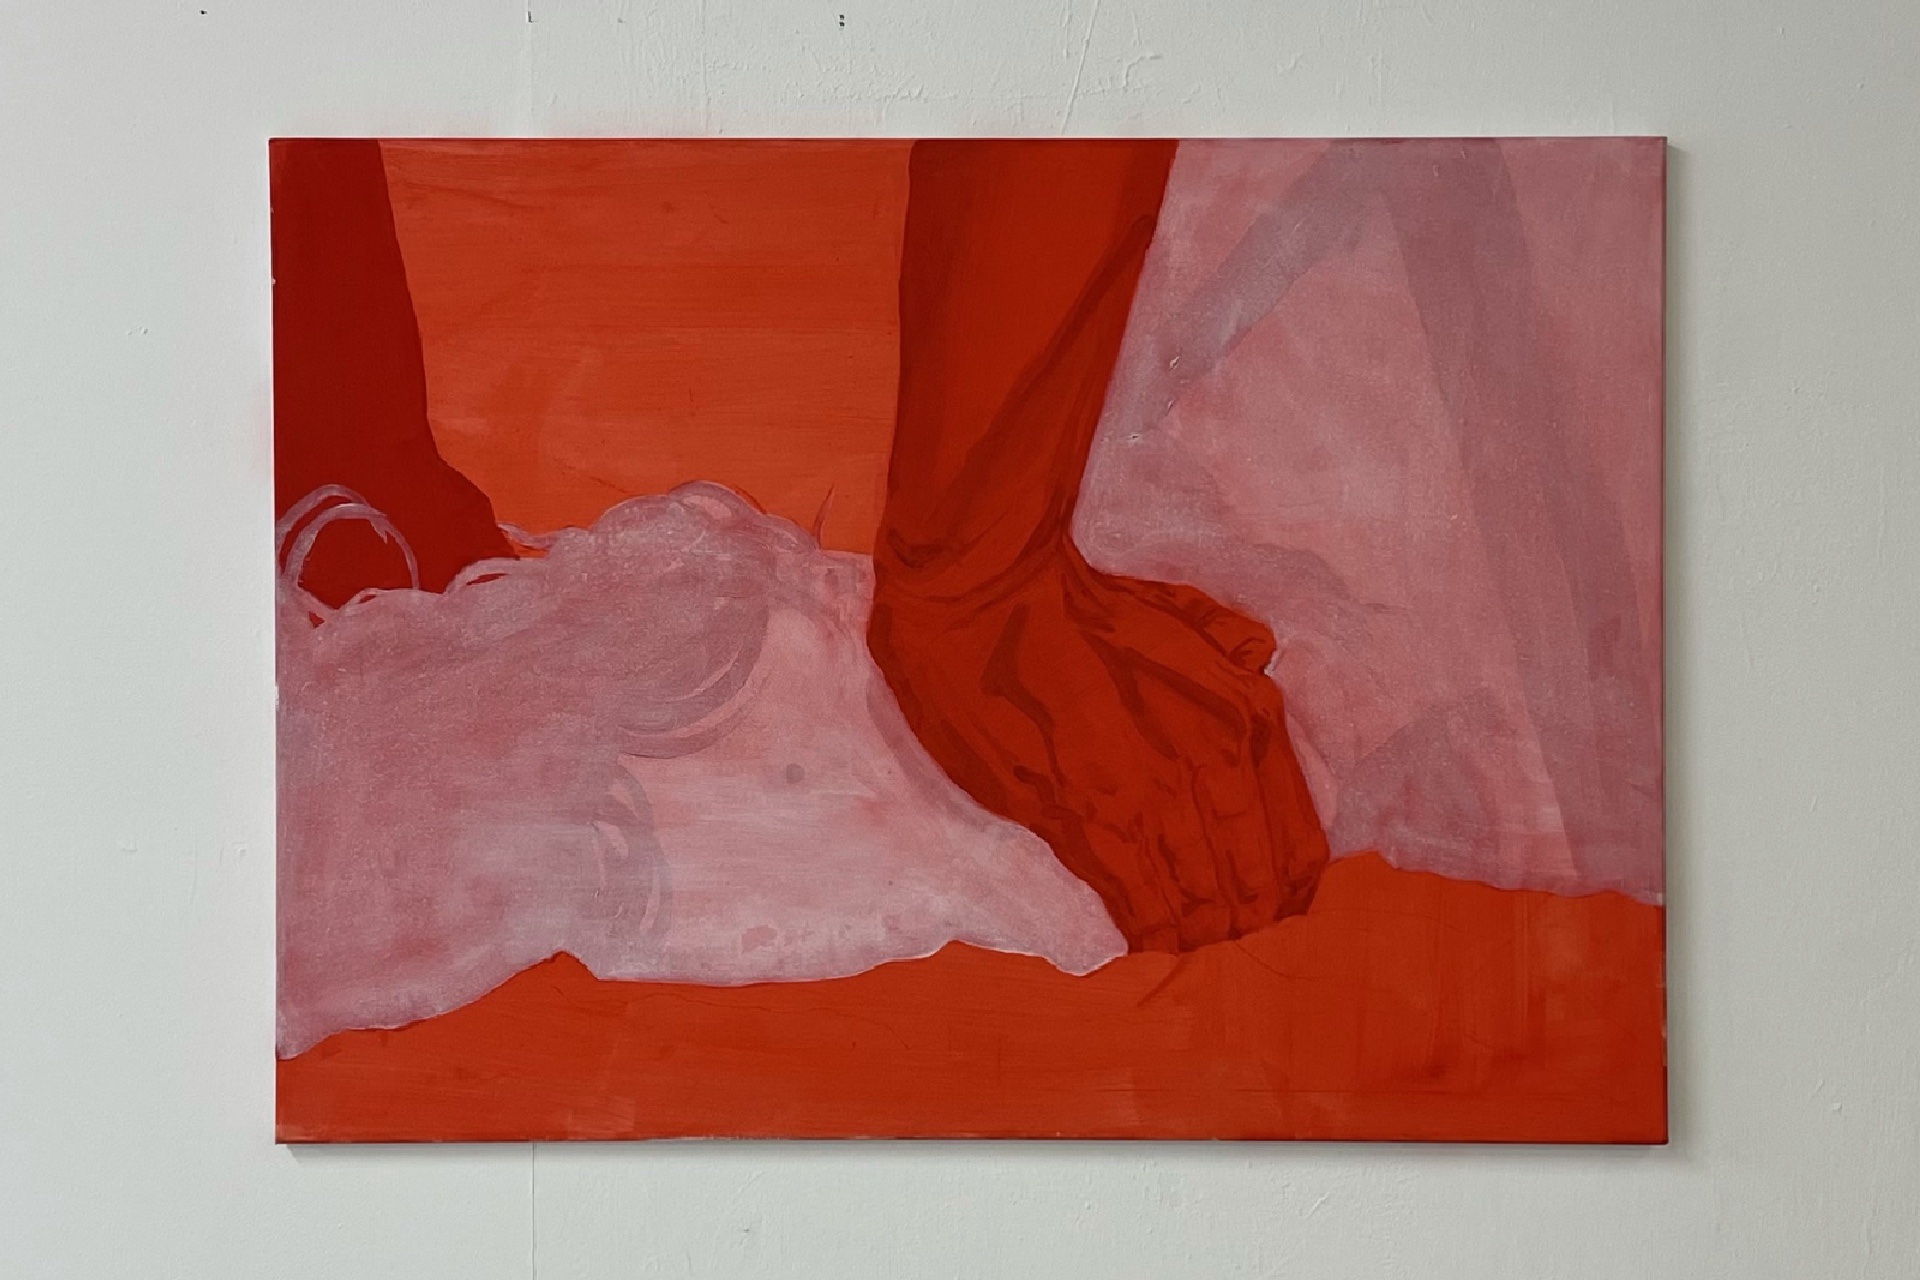 An oil painting hung on a blank white wall, depicting a bright red hand emerging from the top of the canvas smothering the mouth of a white figure laying down